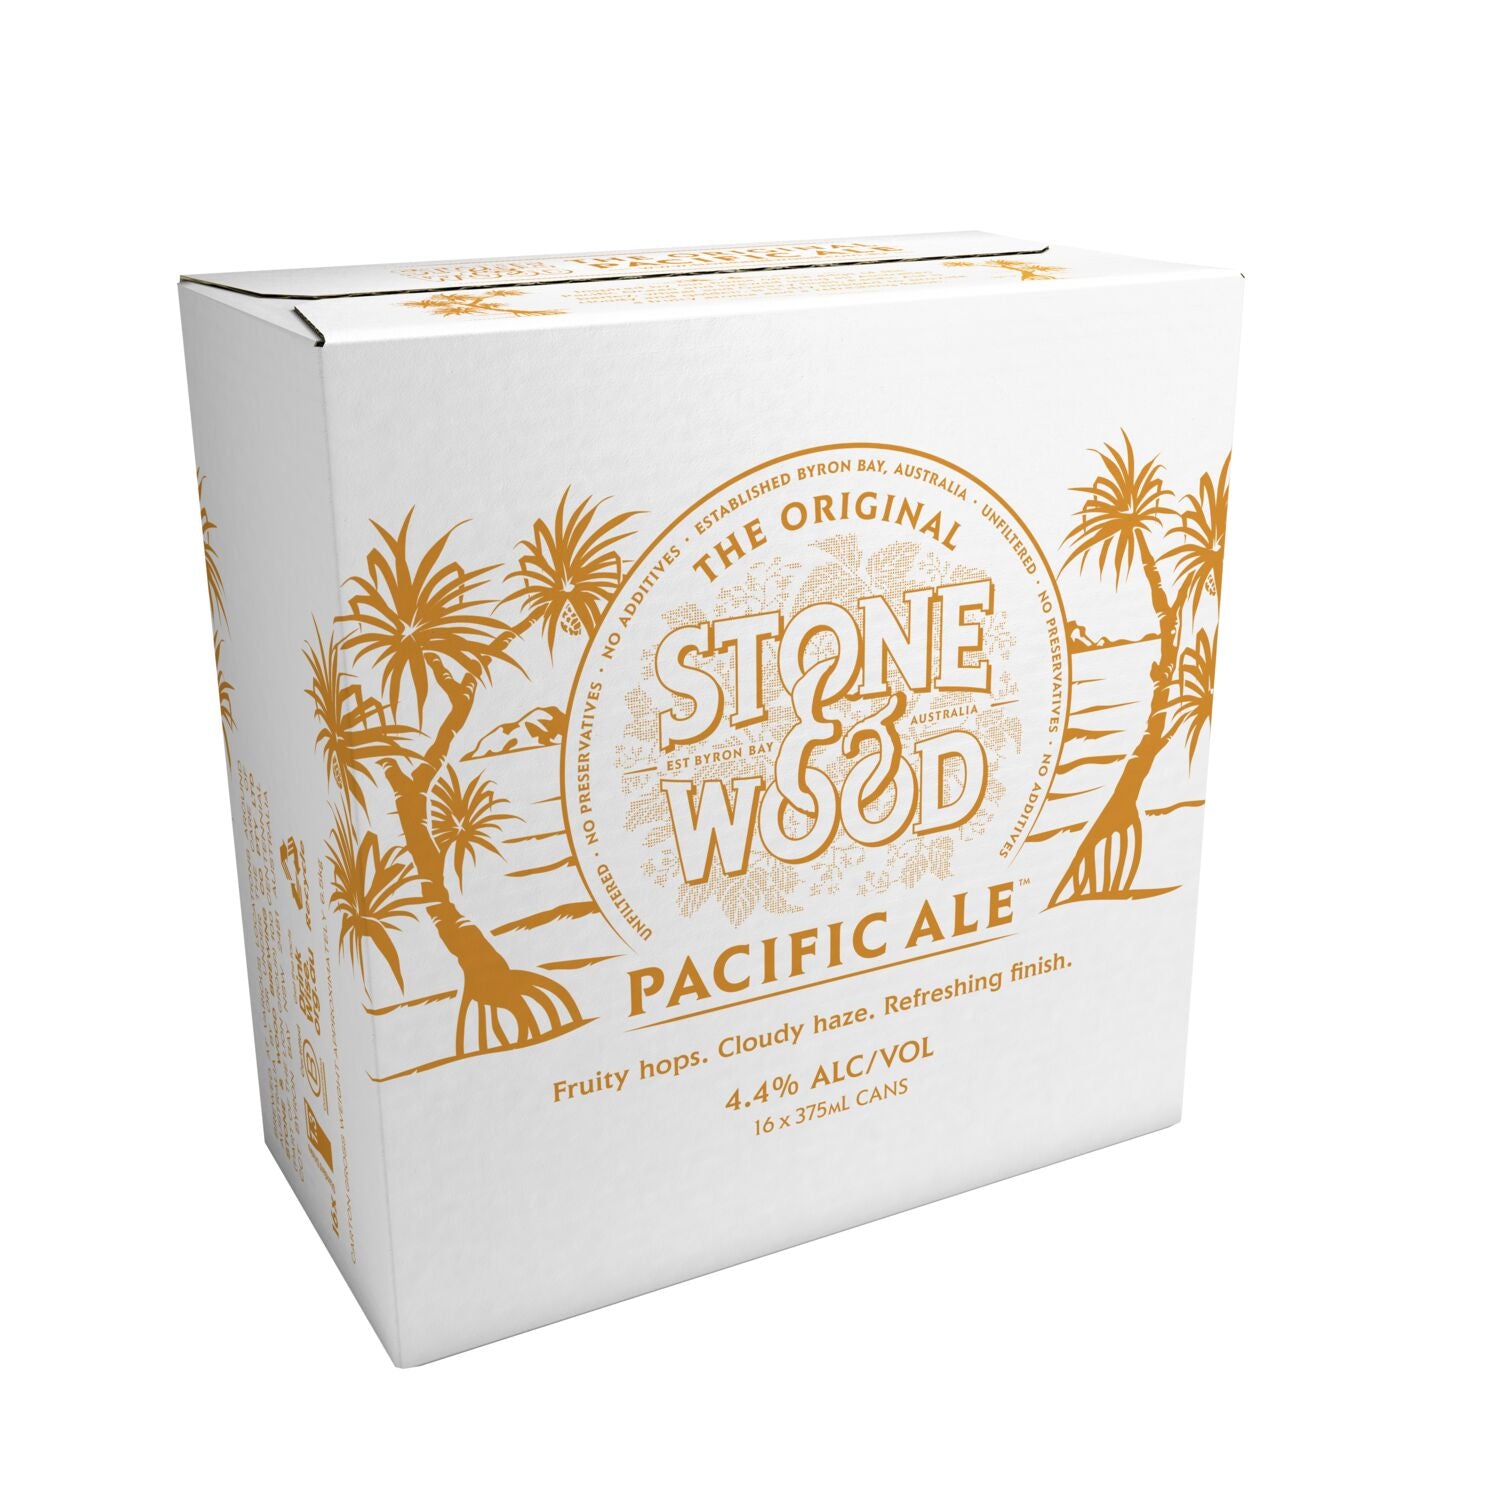 Stone & Wood Pacific Ale Can 375mL